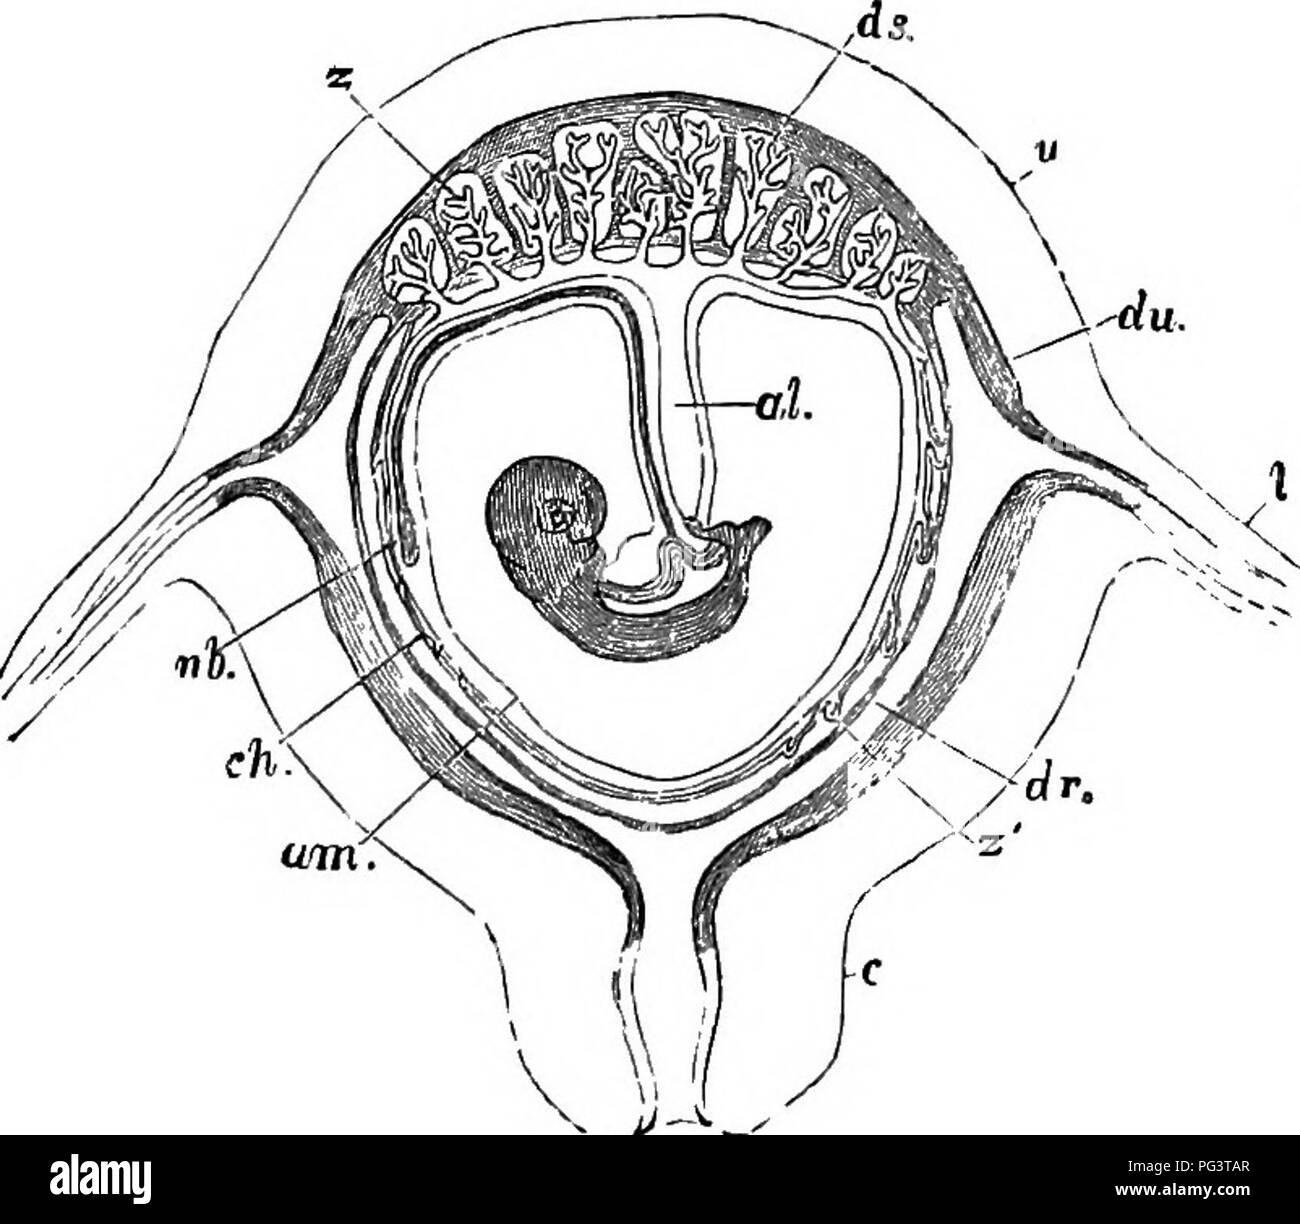 . The elements of embryology . Embryology. XI.J THE CHORION. Fio. 117. 357. M-^-- Diagrammatic Section op Pregnant Human Uterus with CONTAINED F(ETUS. (From Huxley after Longet.) al. allantoic stalk; ni. umbilical vesicle; am. amnion; ch. cho- rion ; ds. decidua serotina; du. decidua vera; dr. decidua reflexa; I. fallopian tube ; c. cervix uteri; u. uterus; z. foetal villi of true placenta; ^. villi of non-plaoental part of chorion. The placenta has a somewhat discoidal form, with a slightly convex uterine surface and a concave embryonic surface. At its edge it is continuous both with the deci Stock Photo